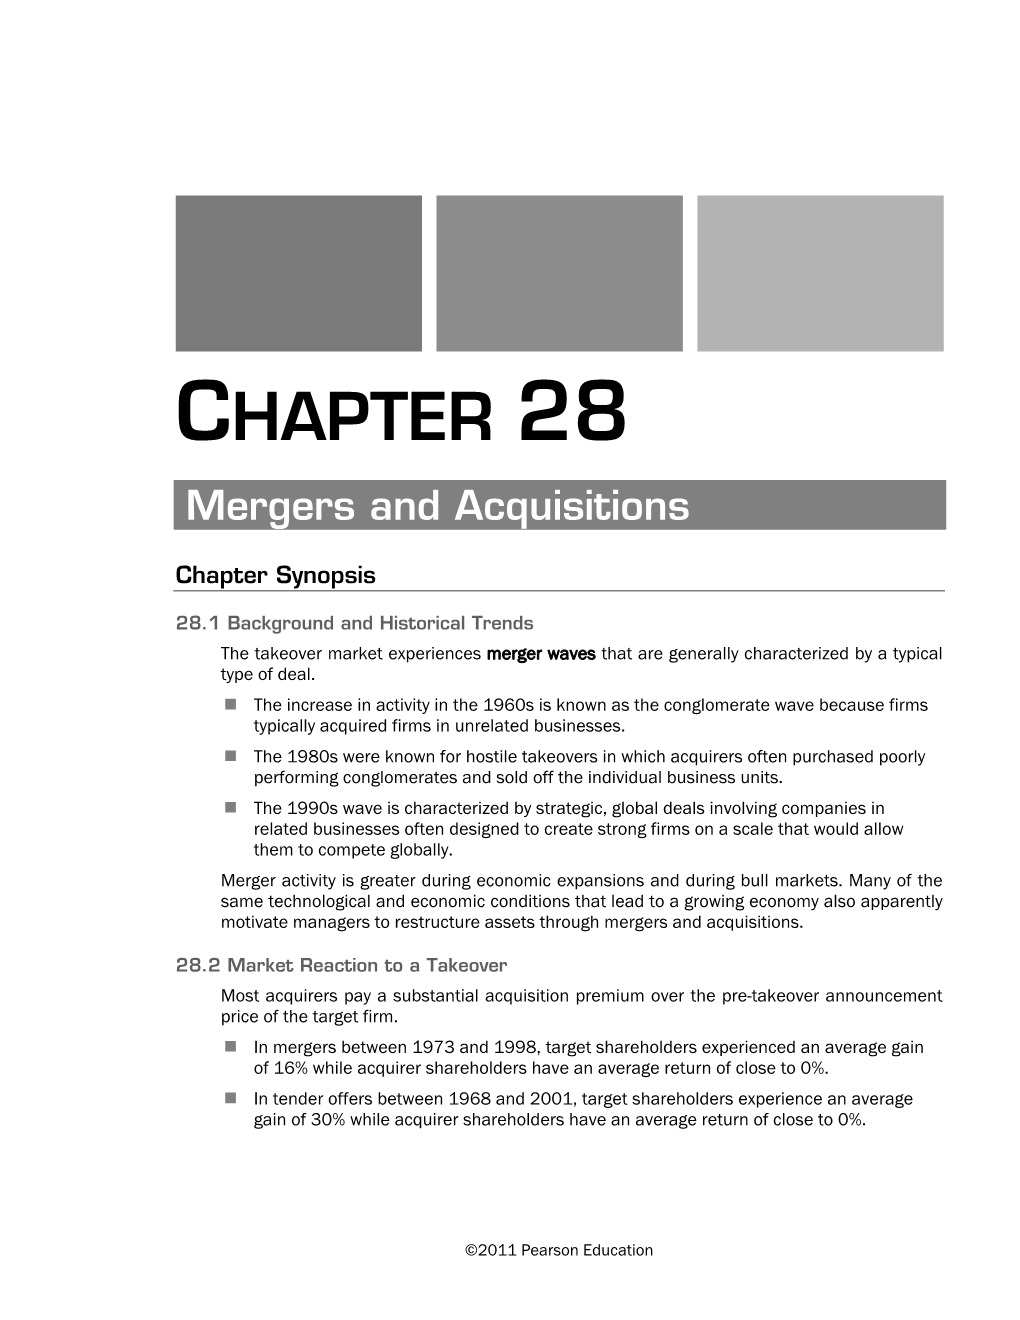 CHAPTER 28 Mergers and Acquisitions